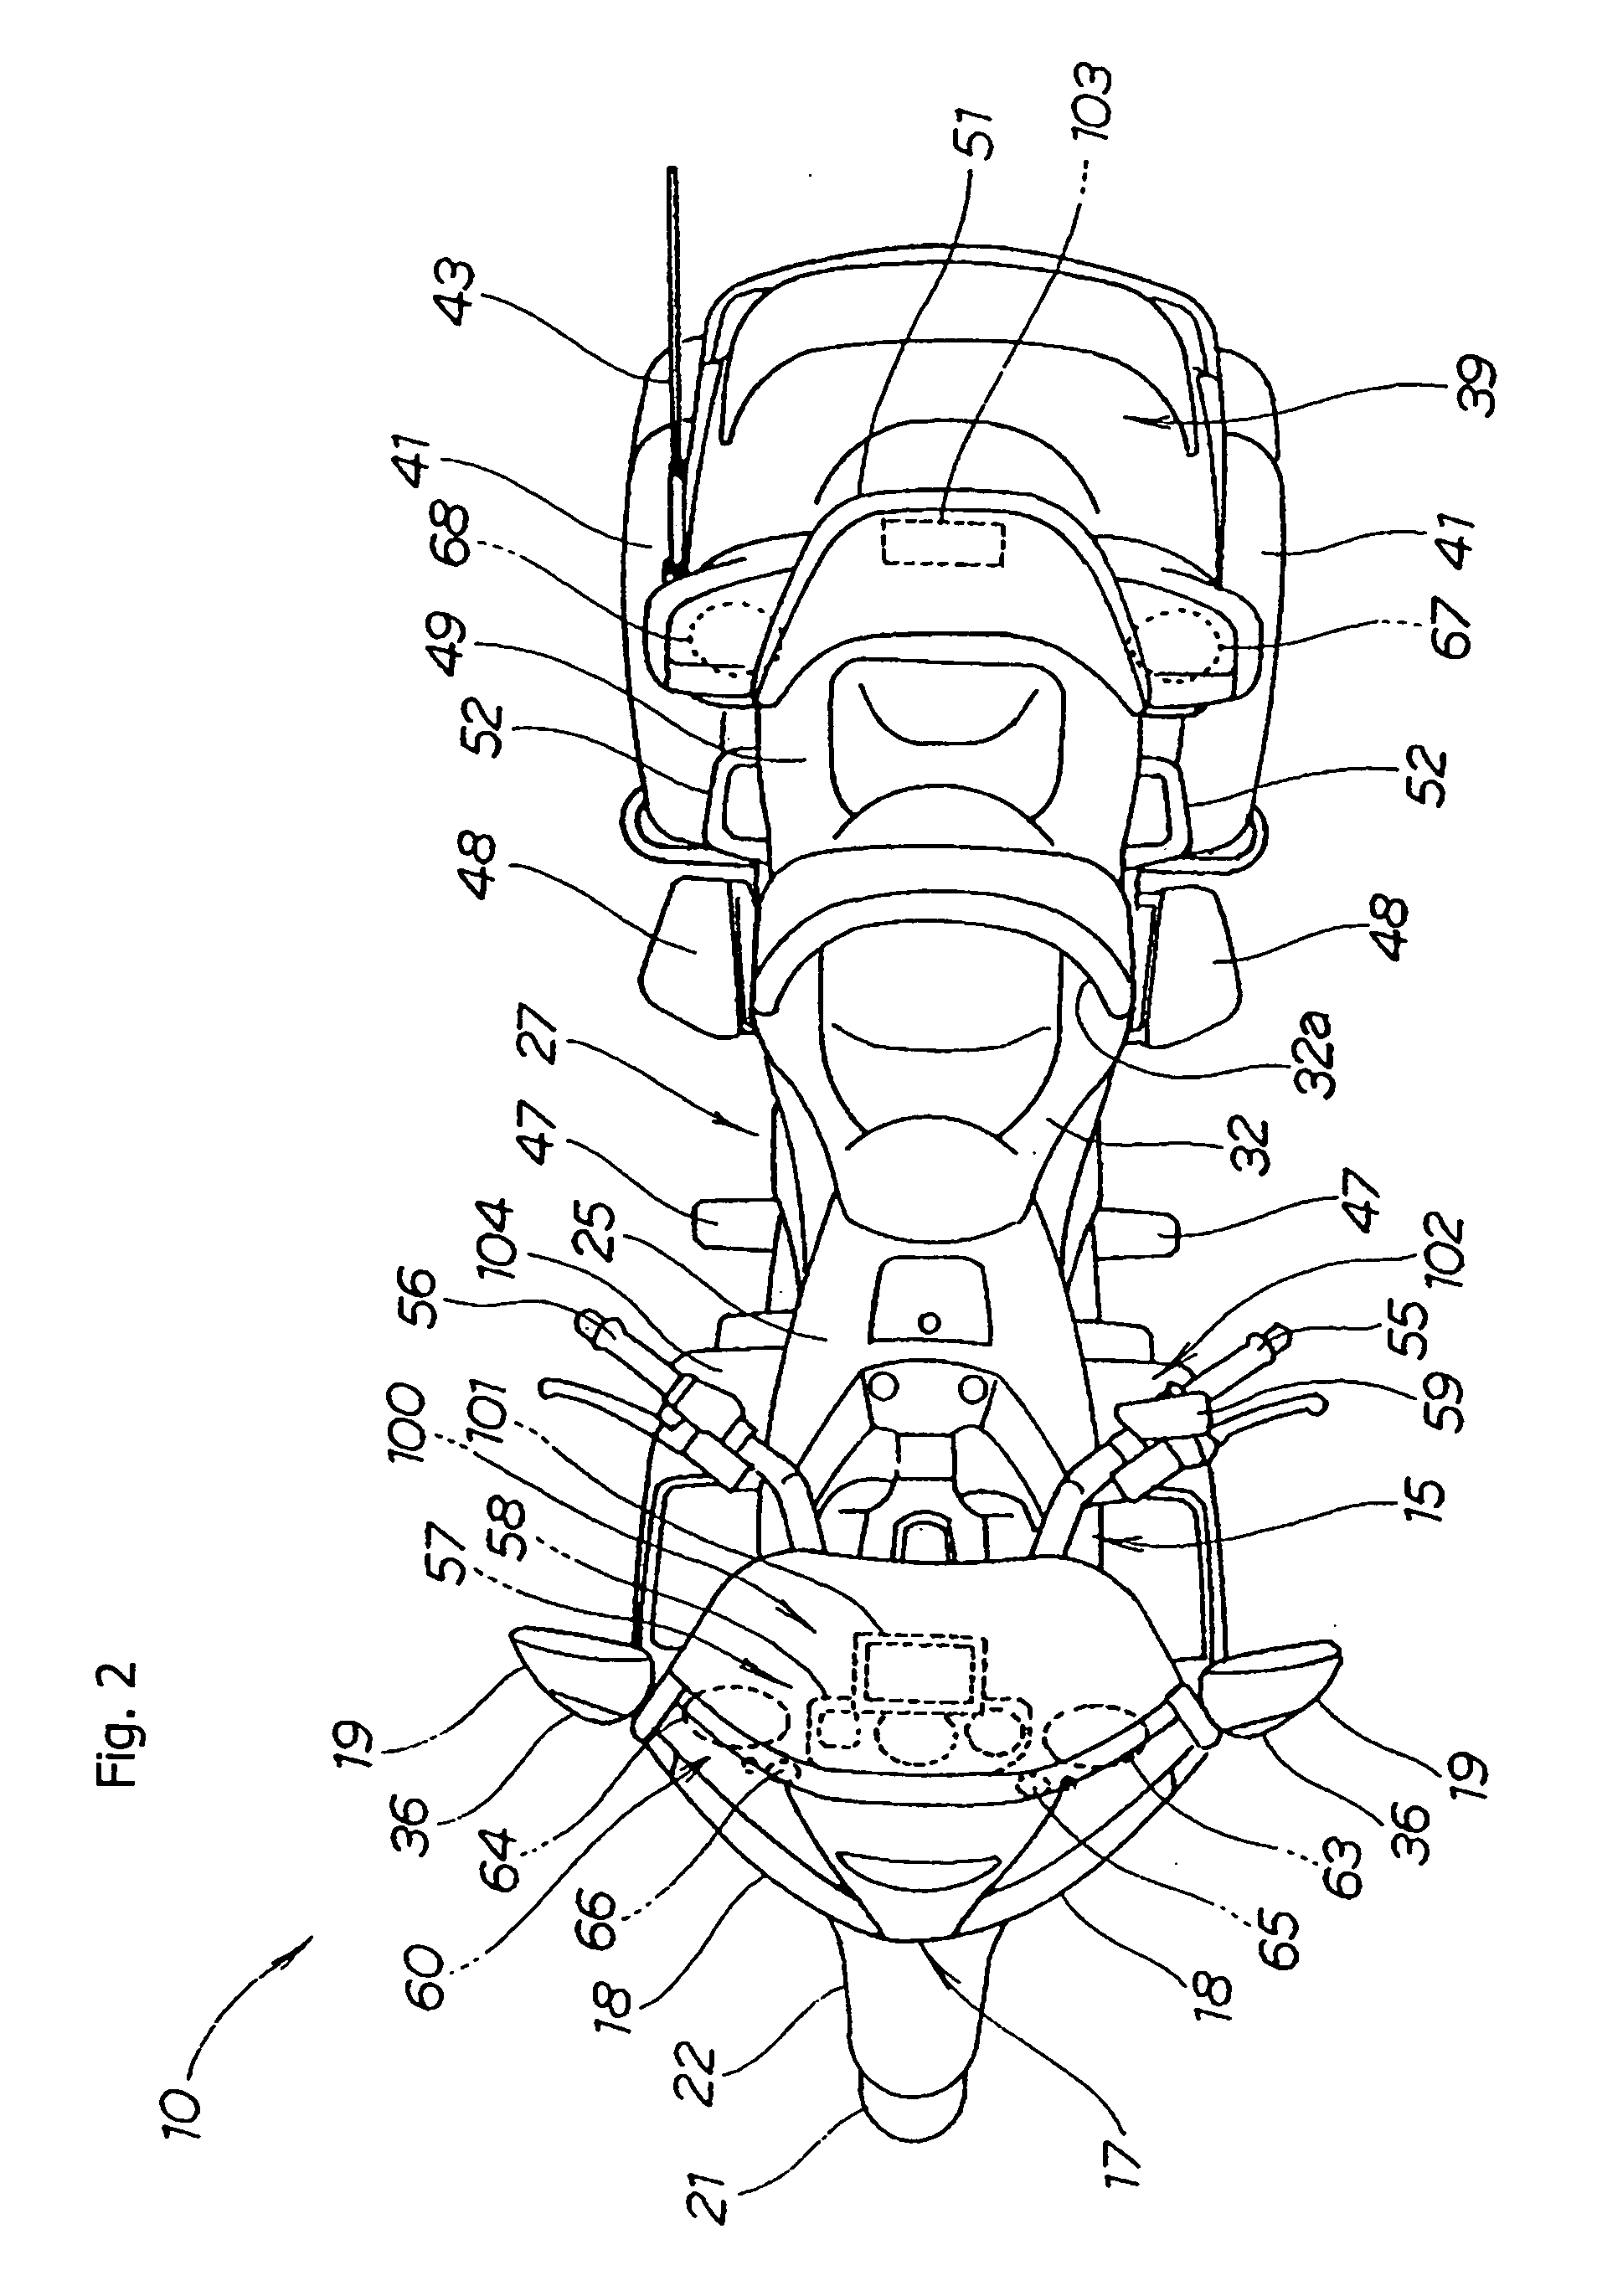 Electrically heated seat apparatus for a vehicle, vehicle incorporating same, and method of using same